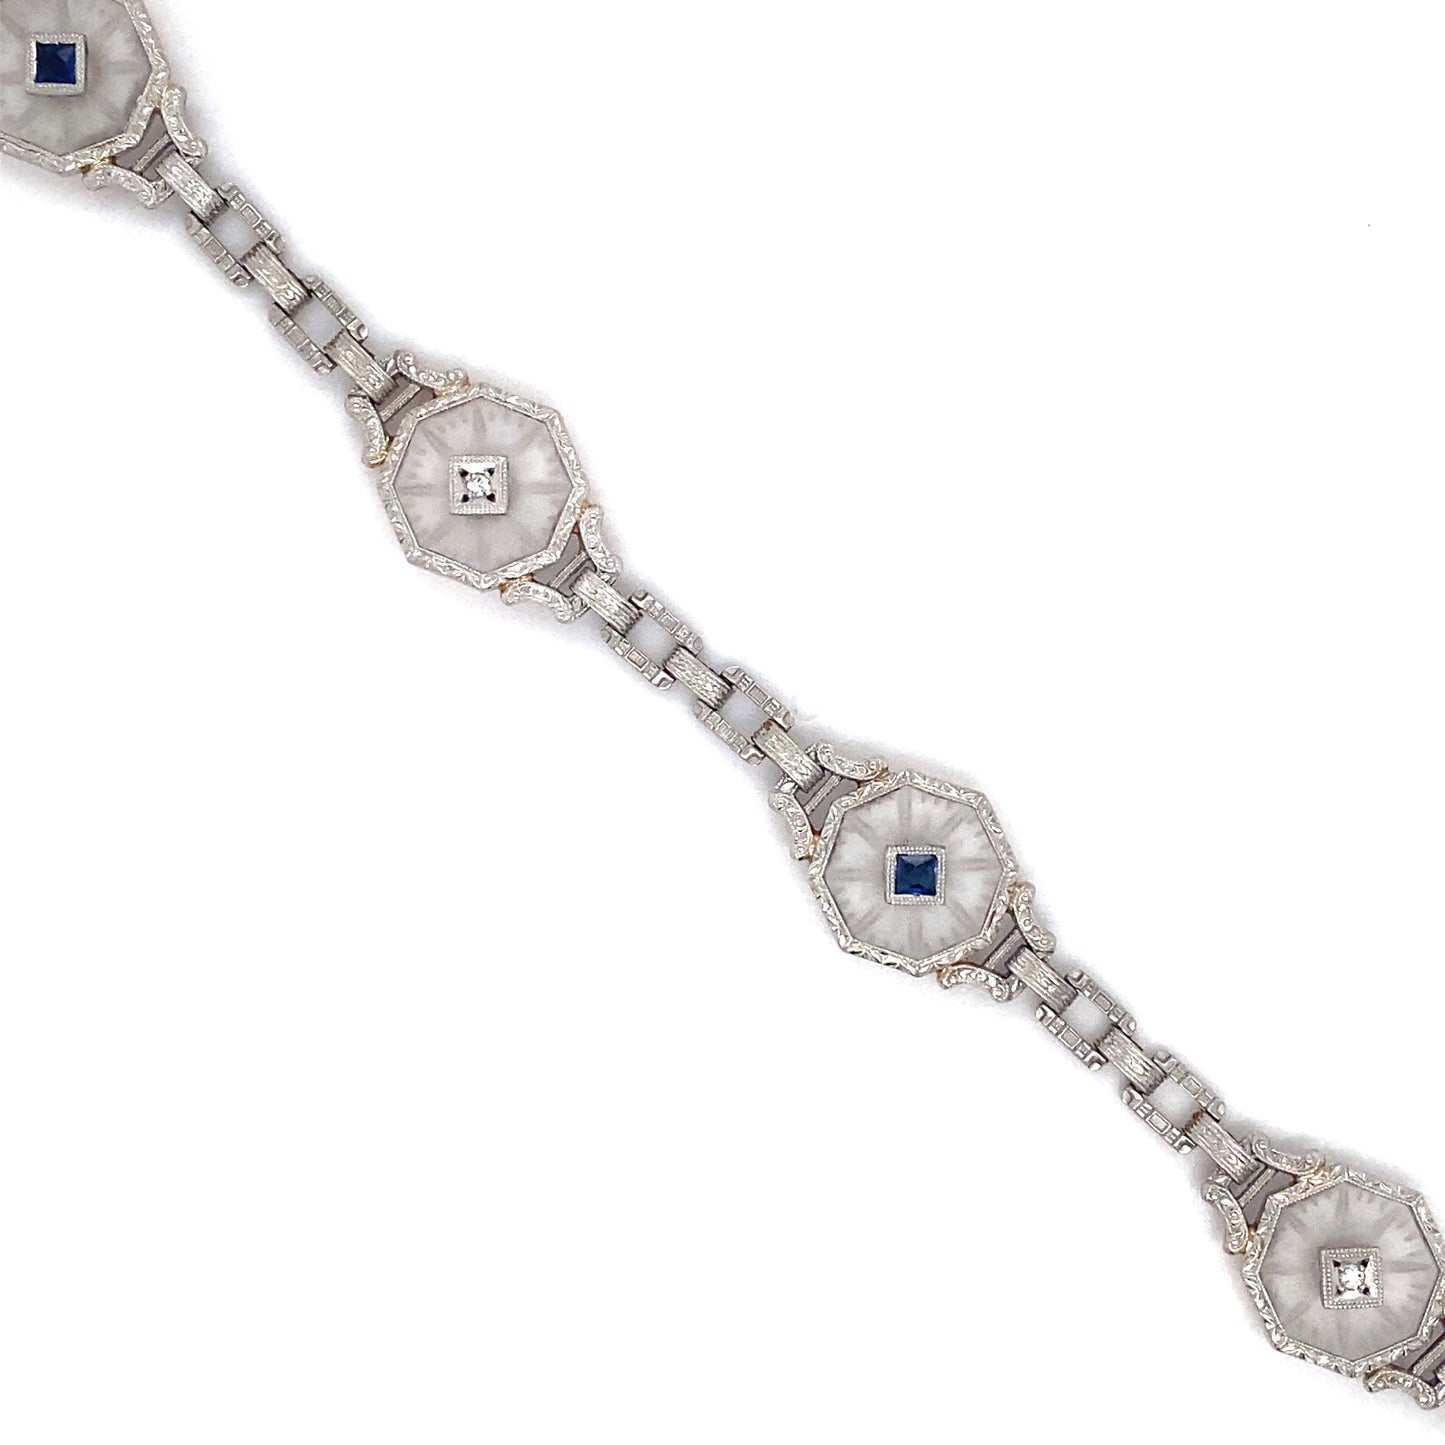 Circa 1880s Victorian Rock Crystal, Sapphire and Diamond Bracelet in 14K Gold